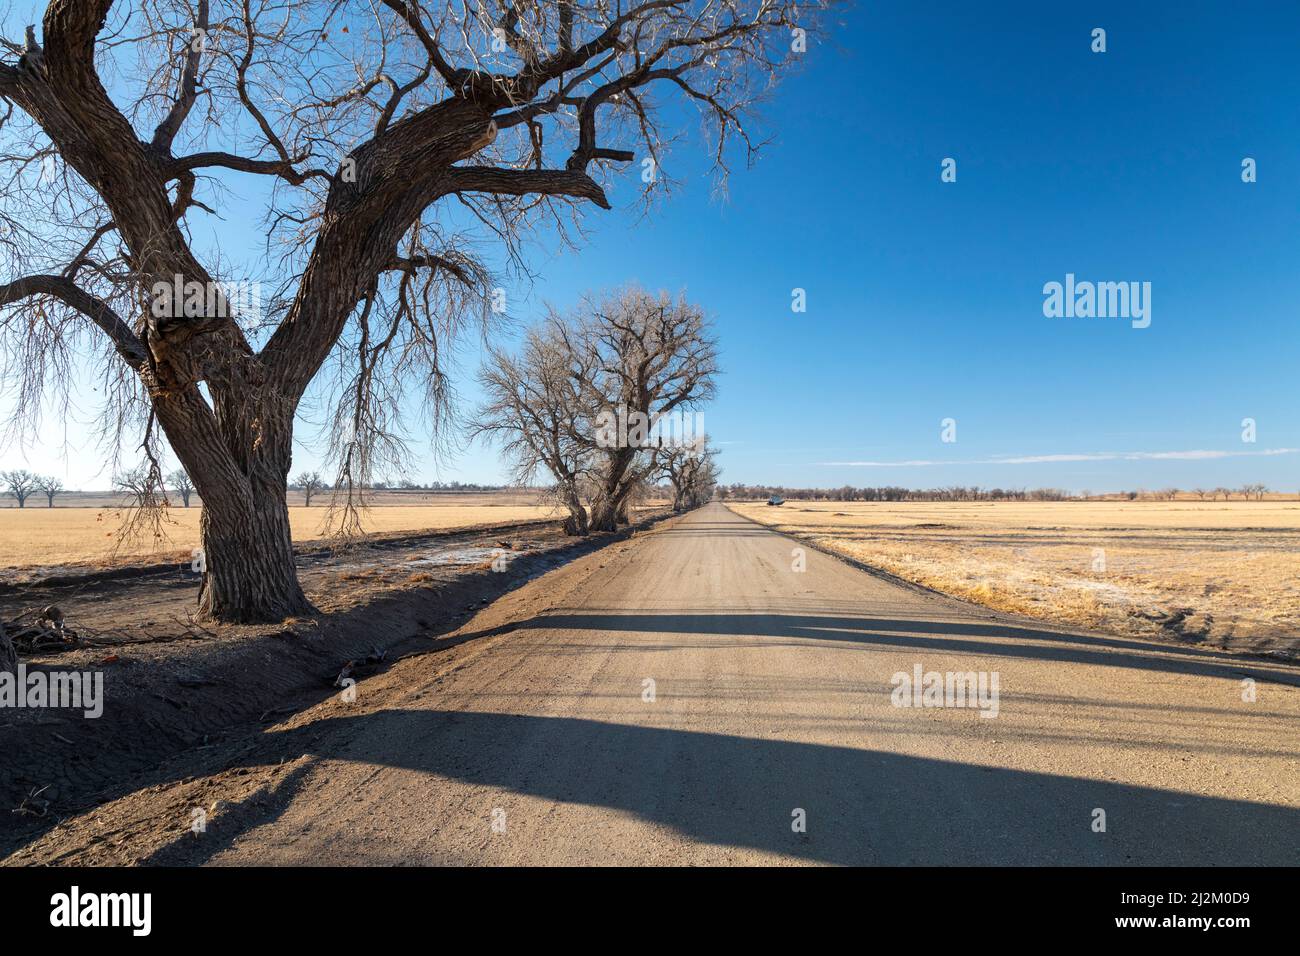 Granada, Colorado - The entrance road to the World War II Amache Japanese internment camp in southeast Colorado. The site became part of the National Stock Photo